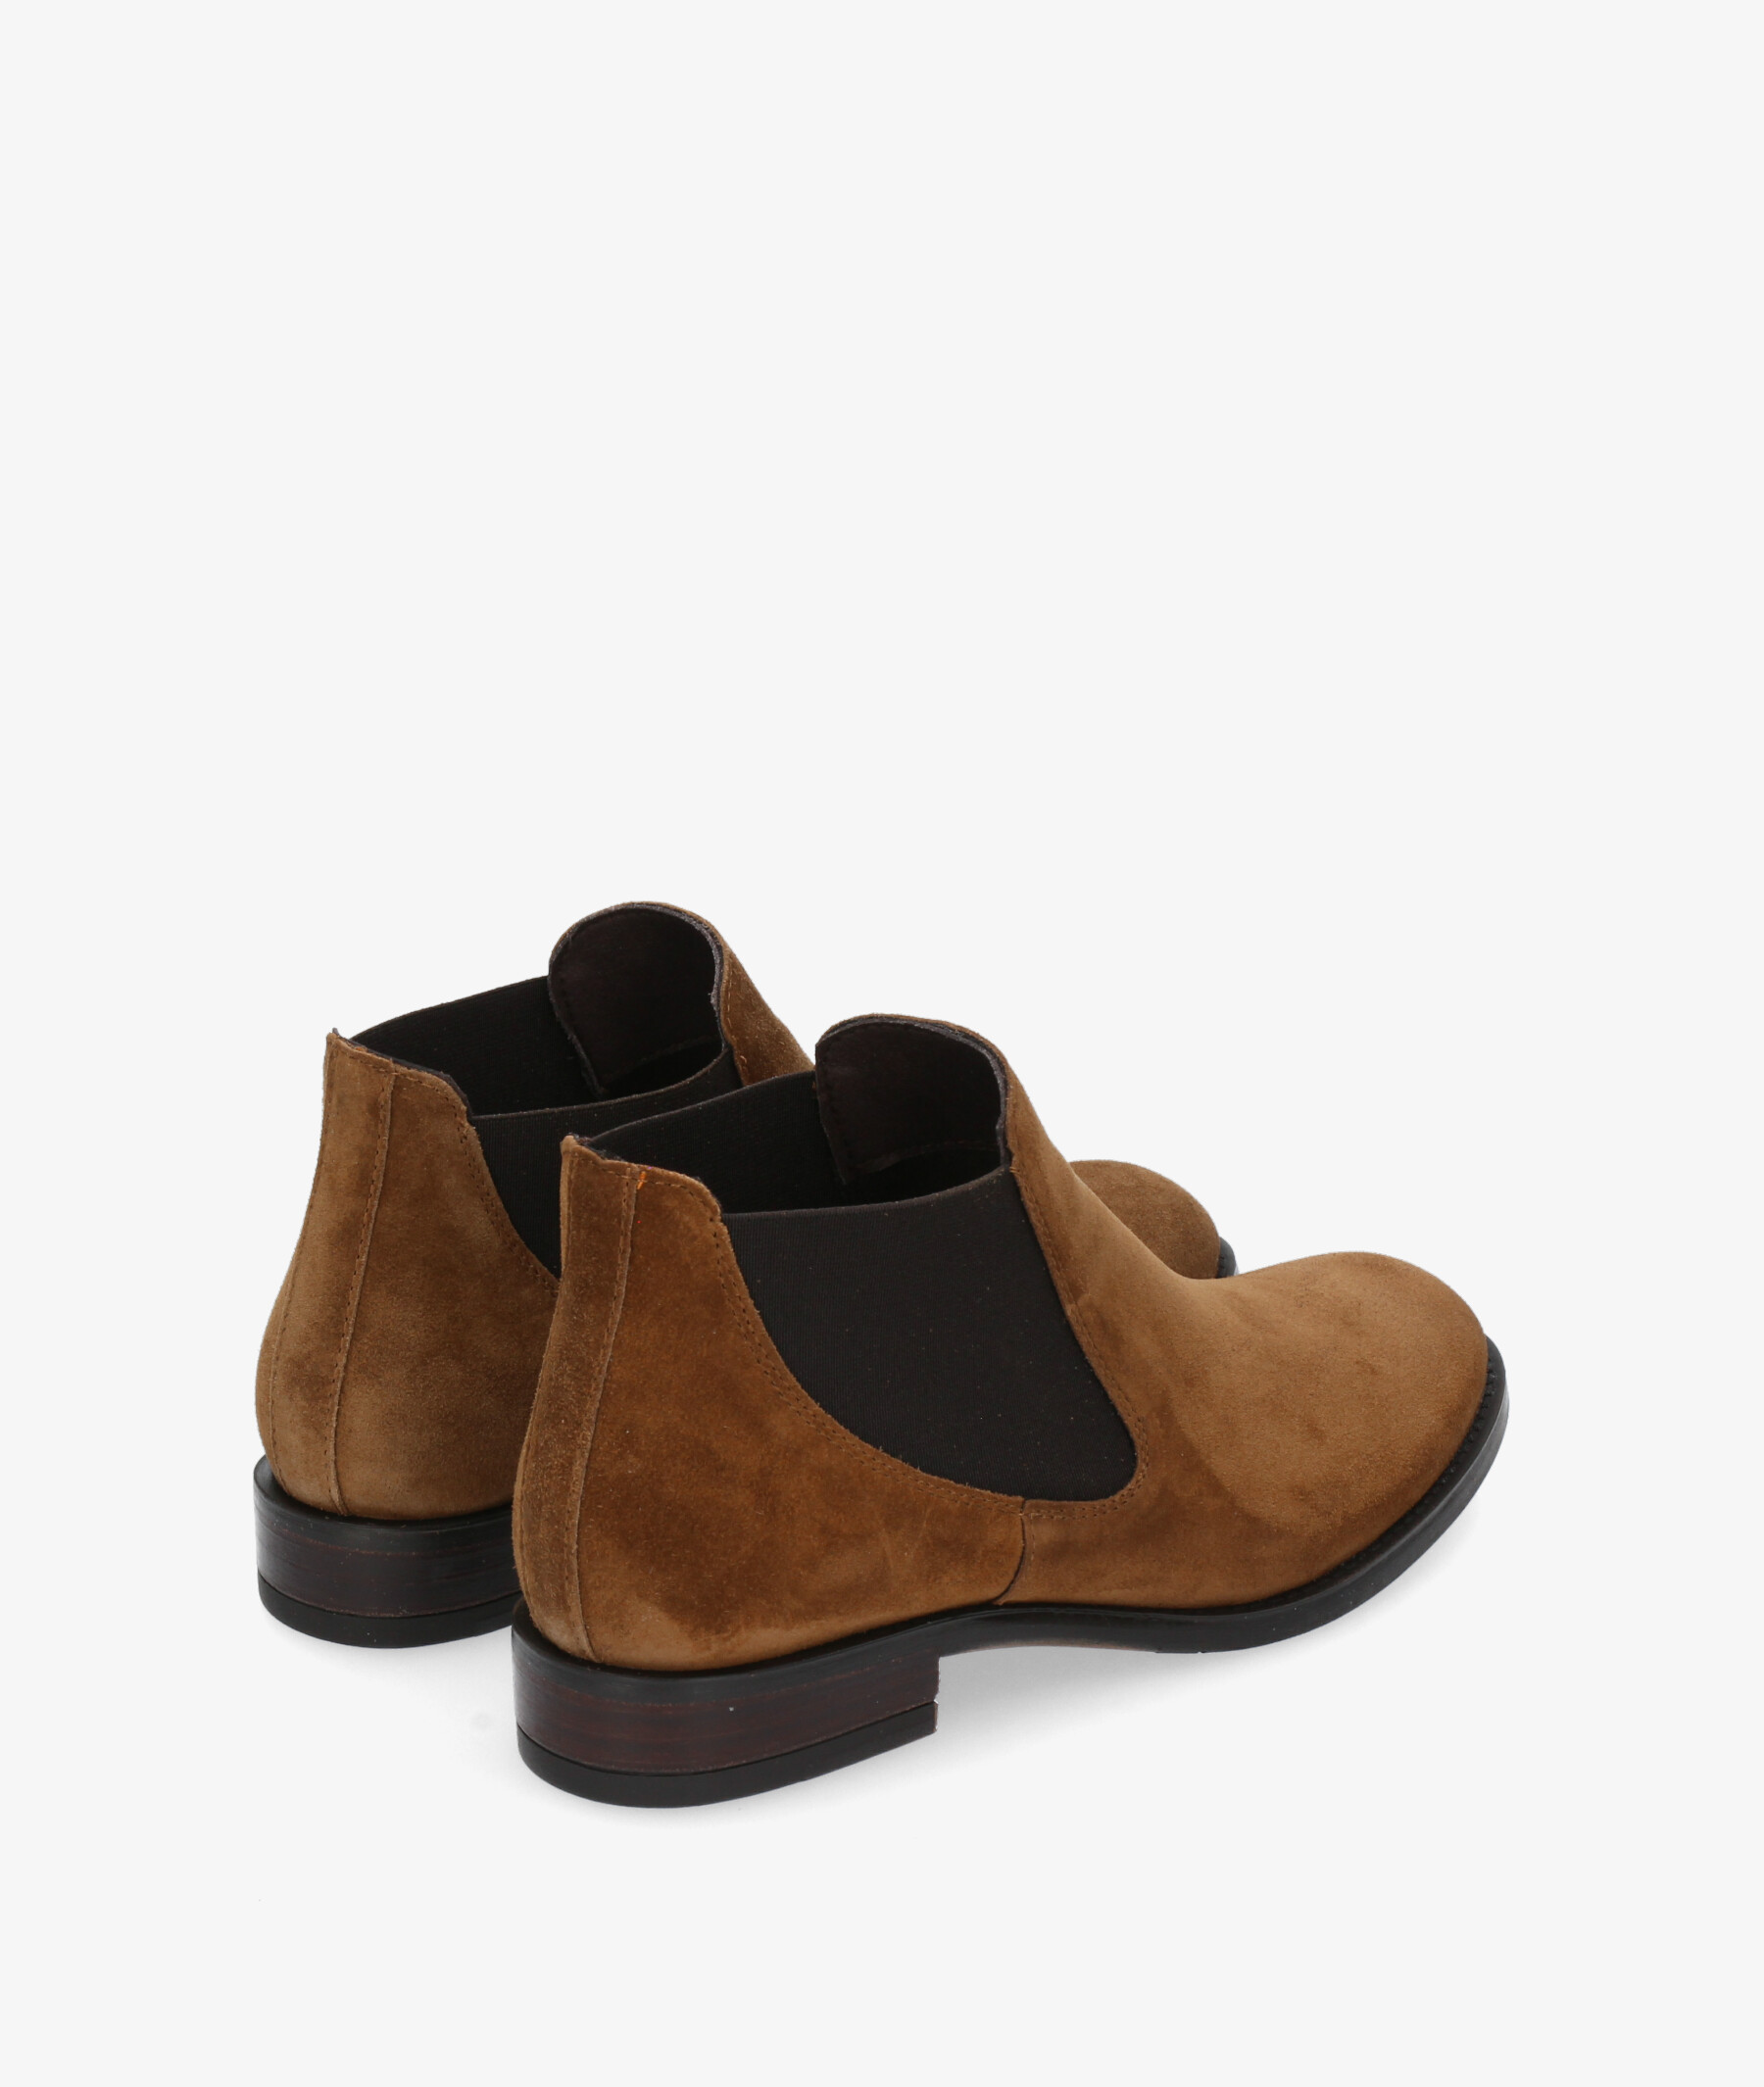 Alpe Suede Leather Ankle Boots 2646 cuero image 2